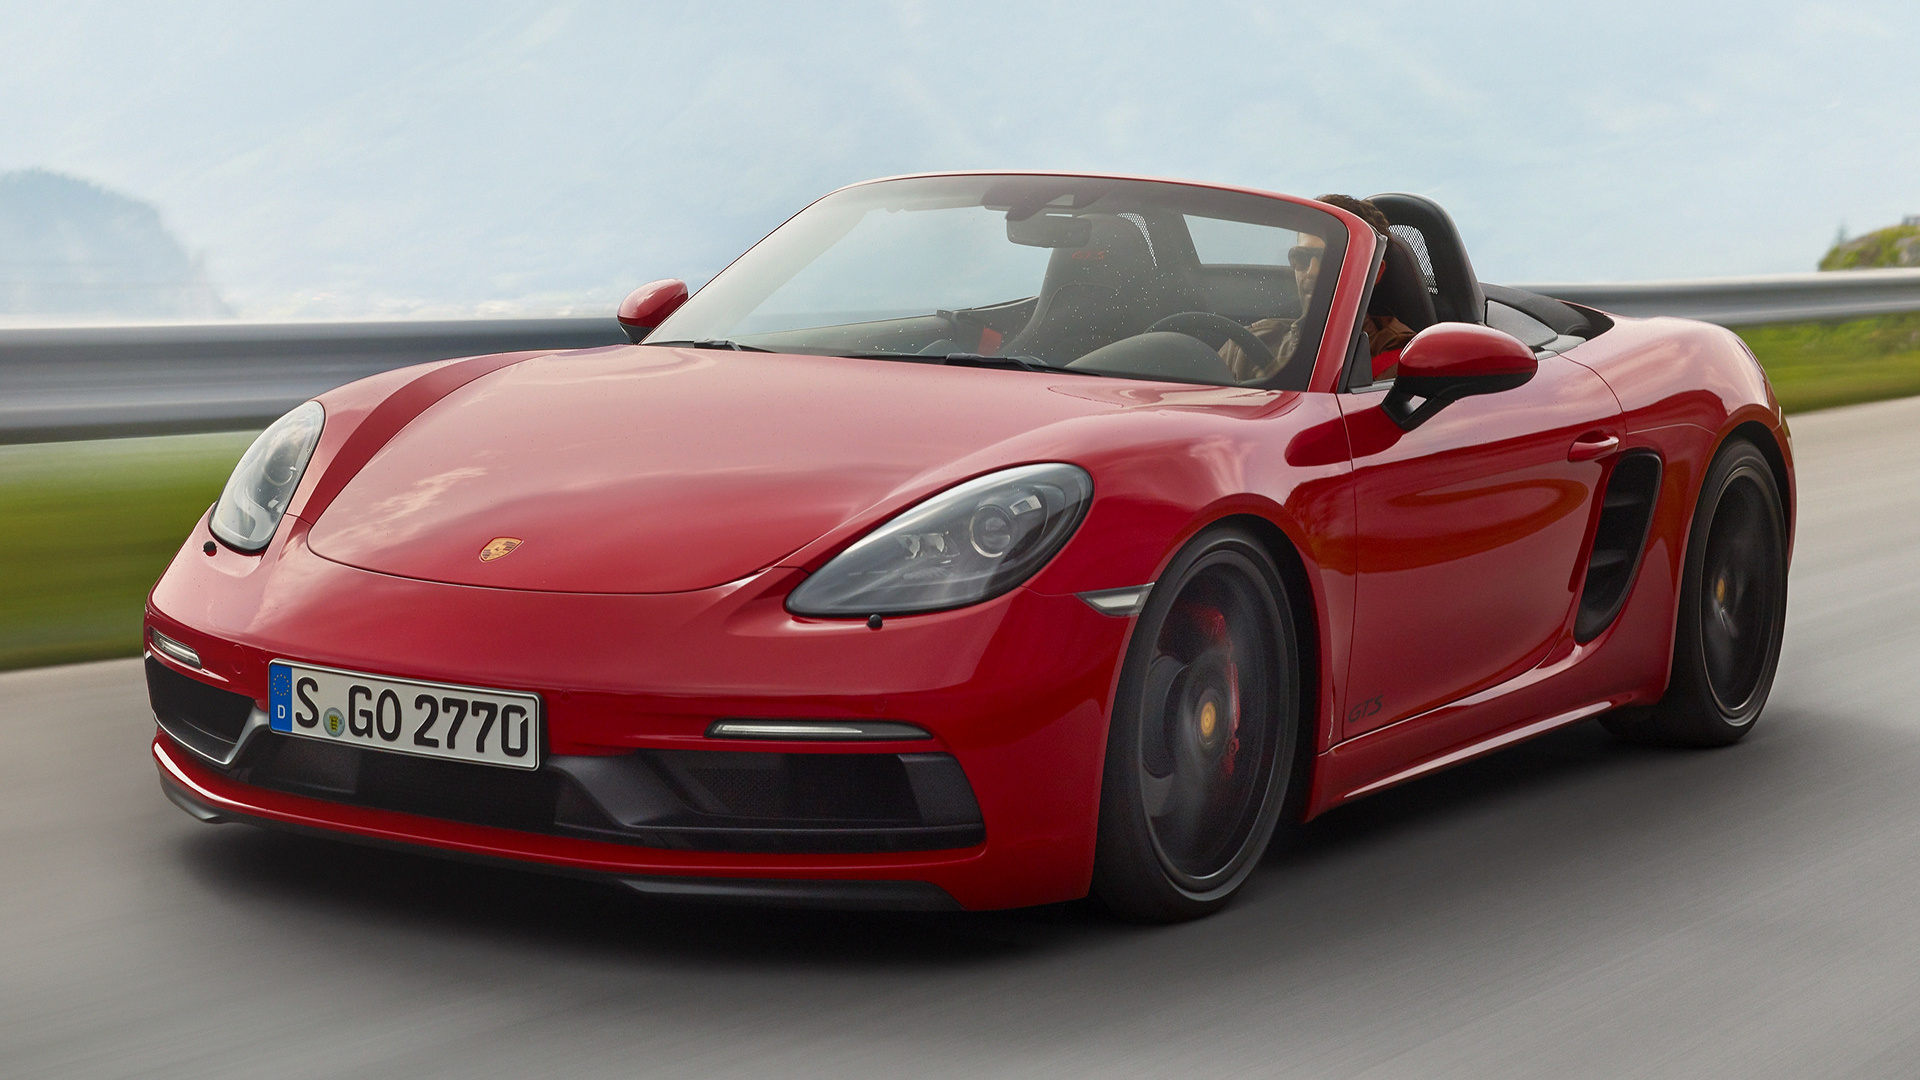 Porsche Boxster Gts Wallpaper And HD Image